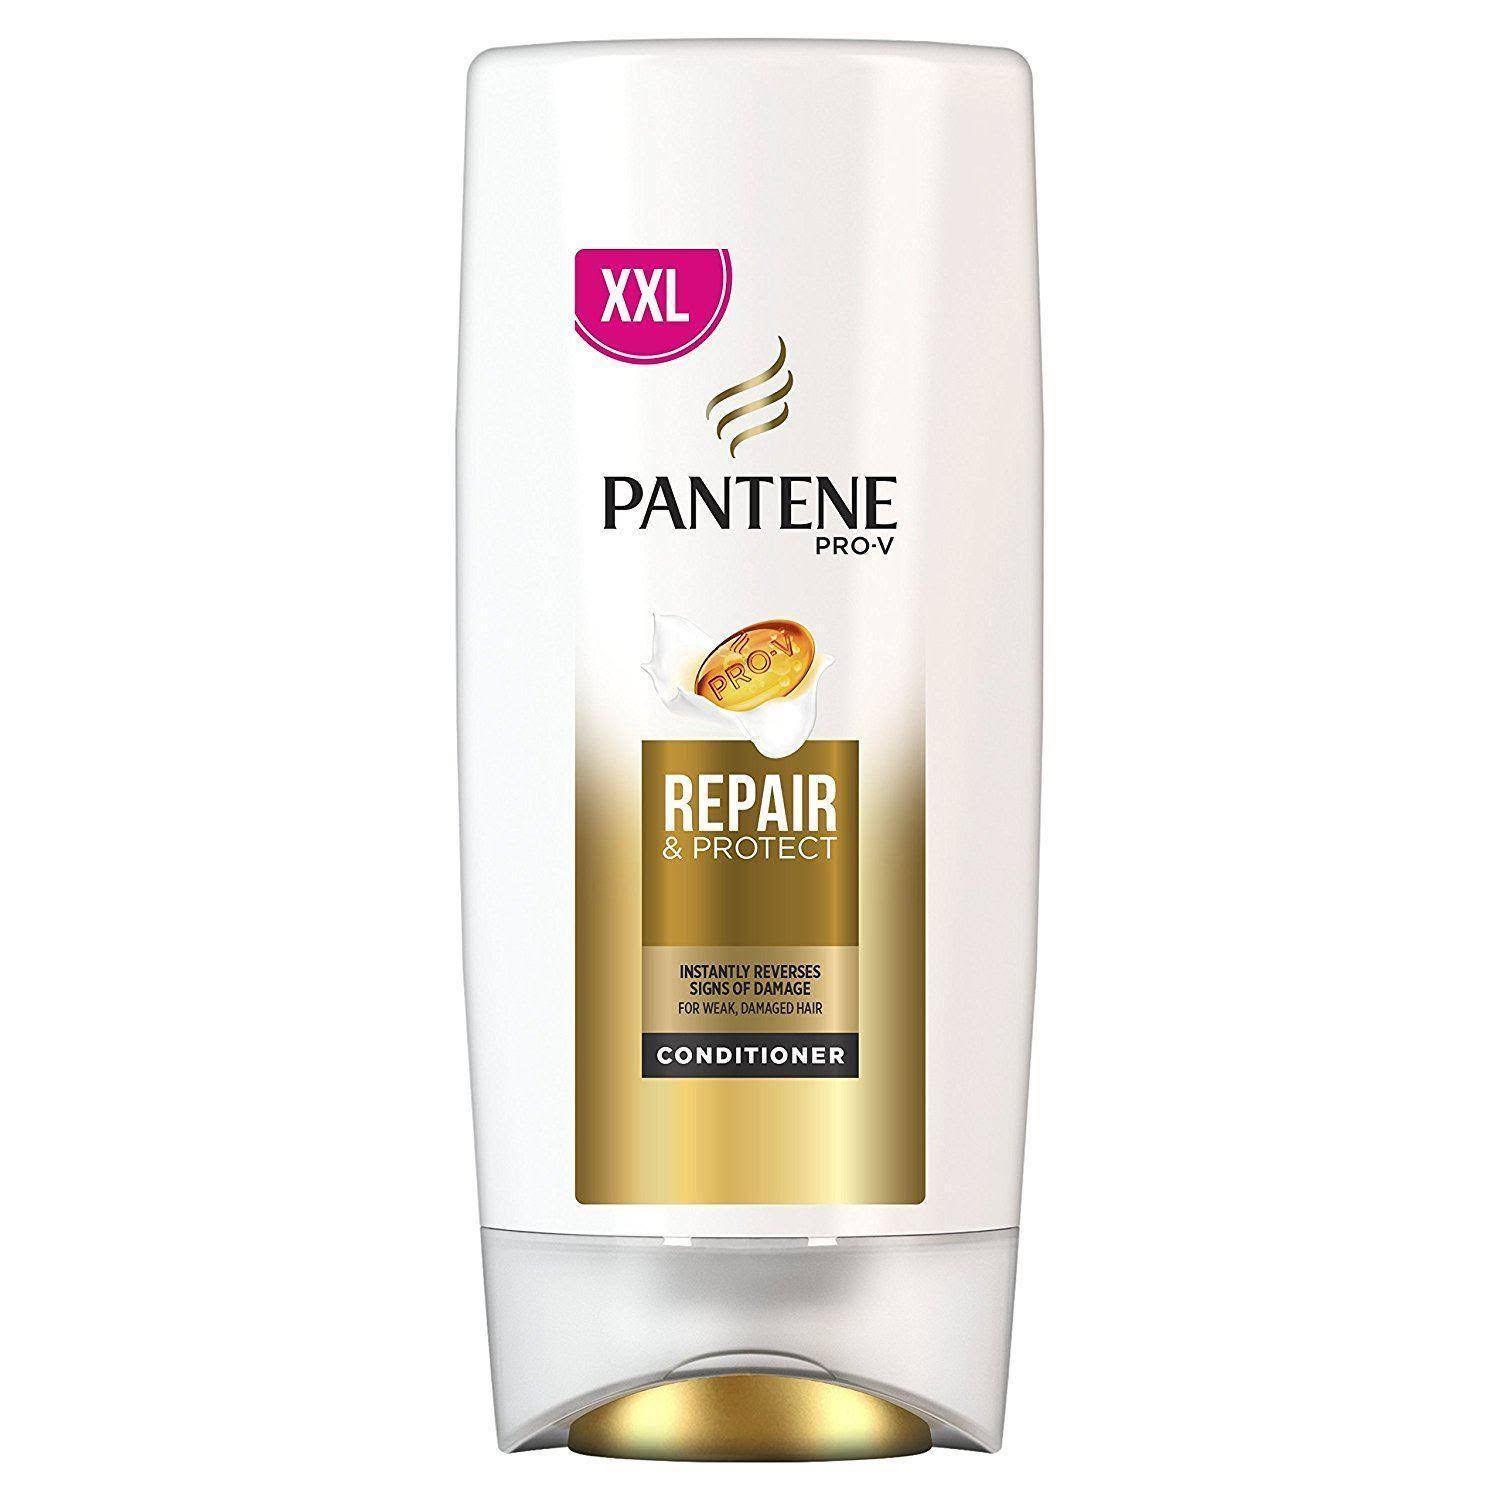 Pantene Pro V Repair and Protect Conditioner - for Damaged Hair, 700ml